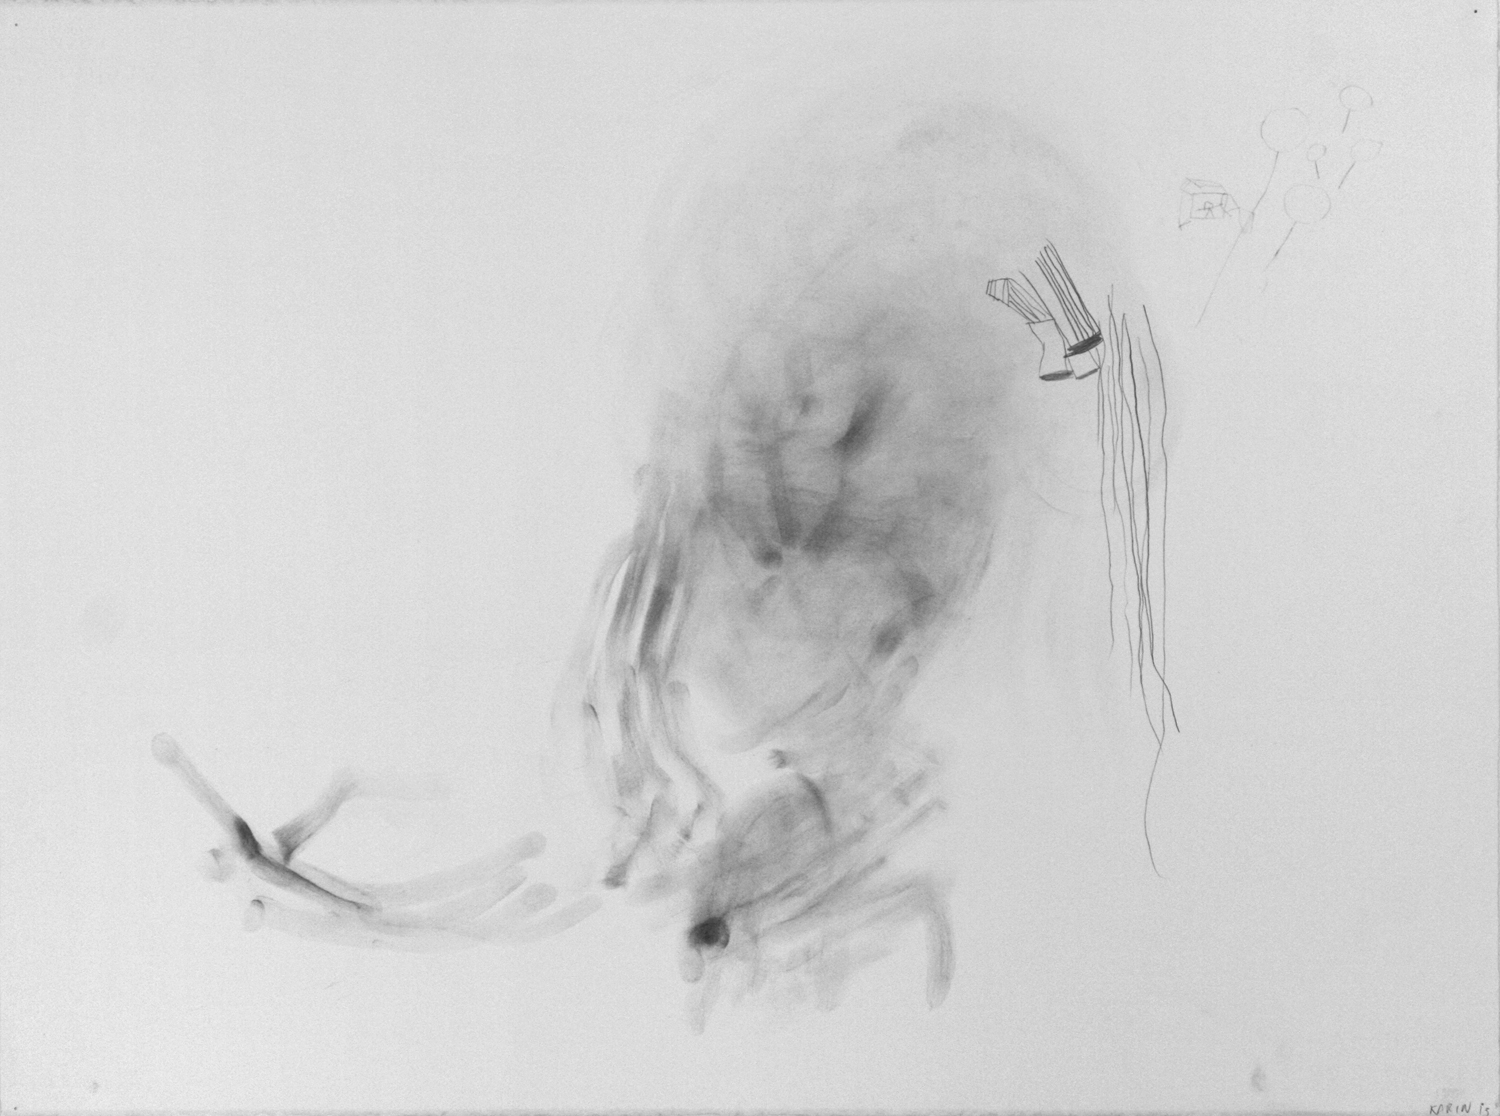  Untitled, 2014. 22" x 30", pencil on paper.  